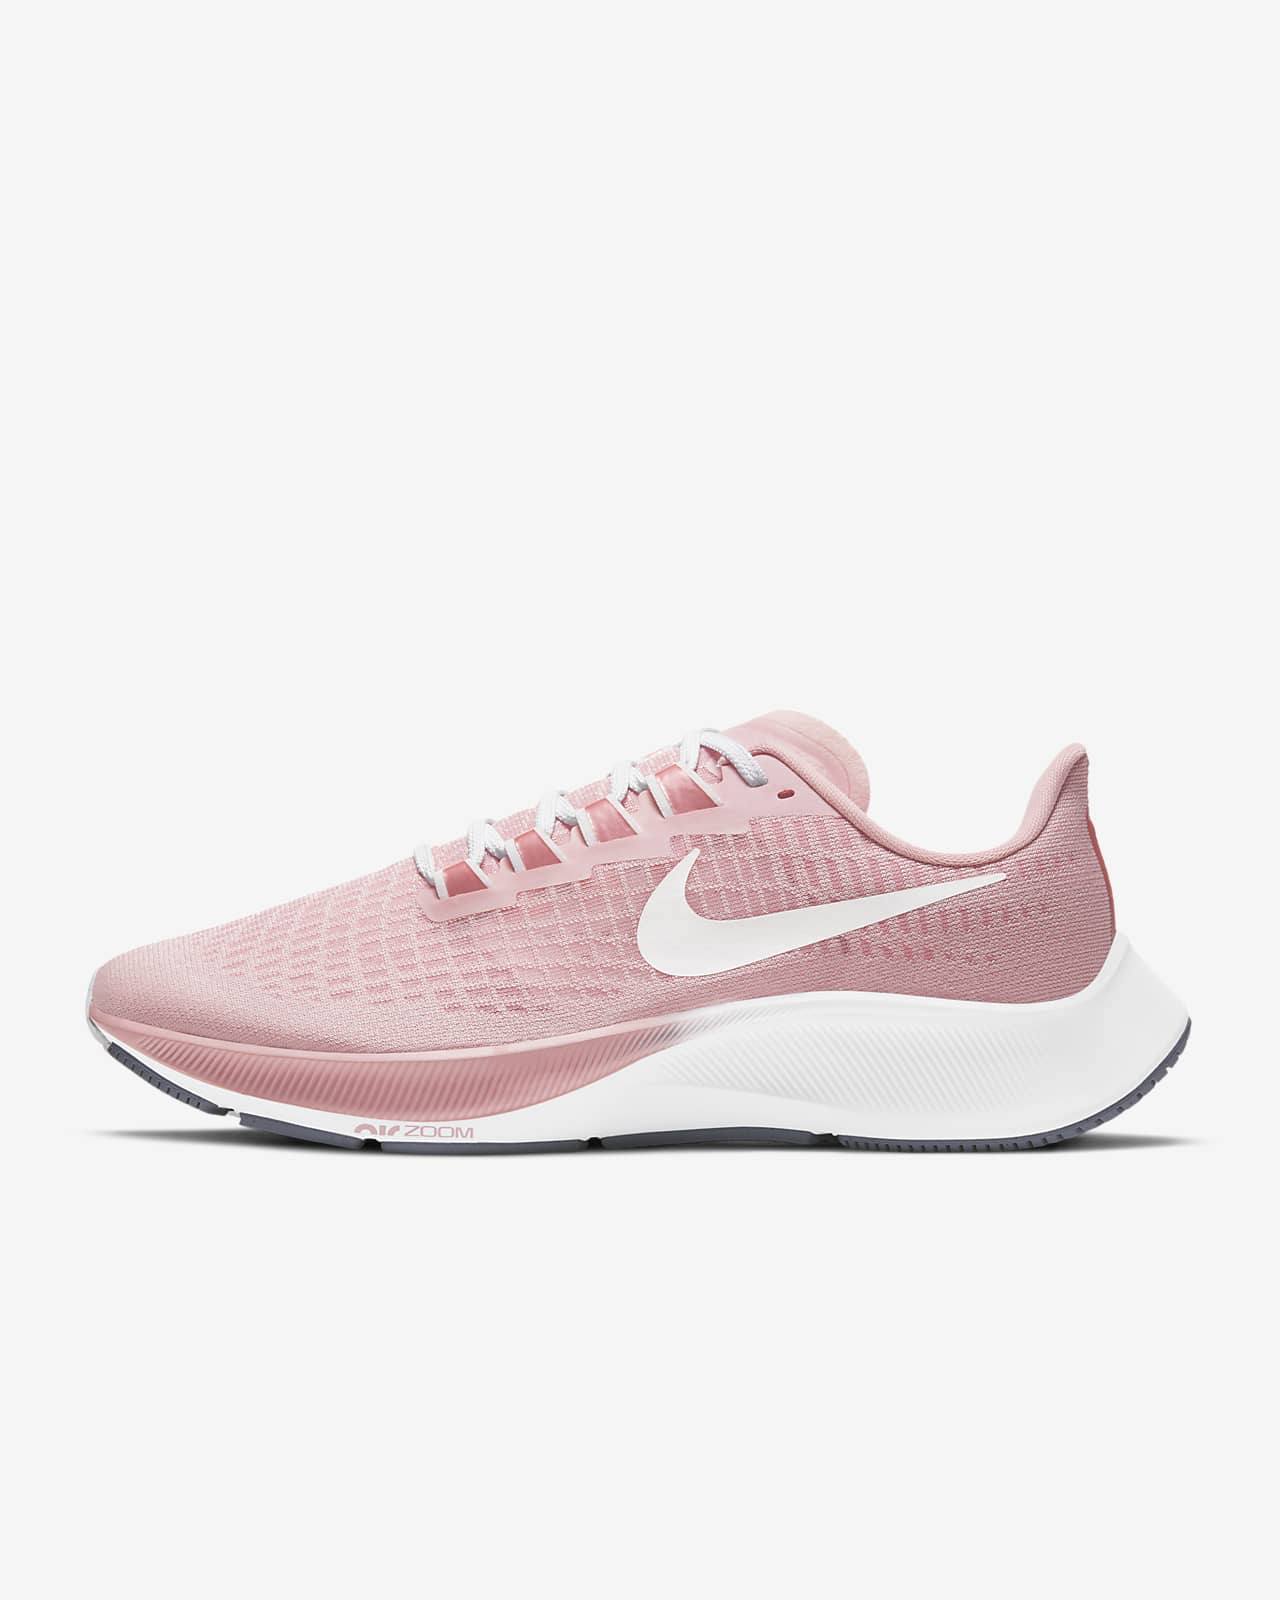 Take out insurance Pants the study Nike Pegasus Zoom Pink Discount, SAVE 55% - aveclumiere.com